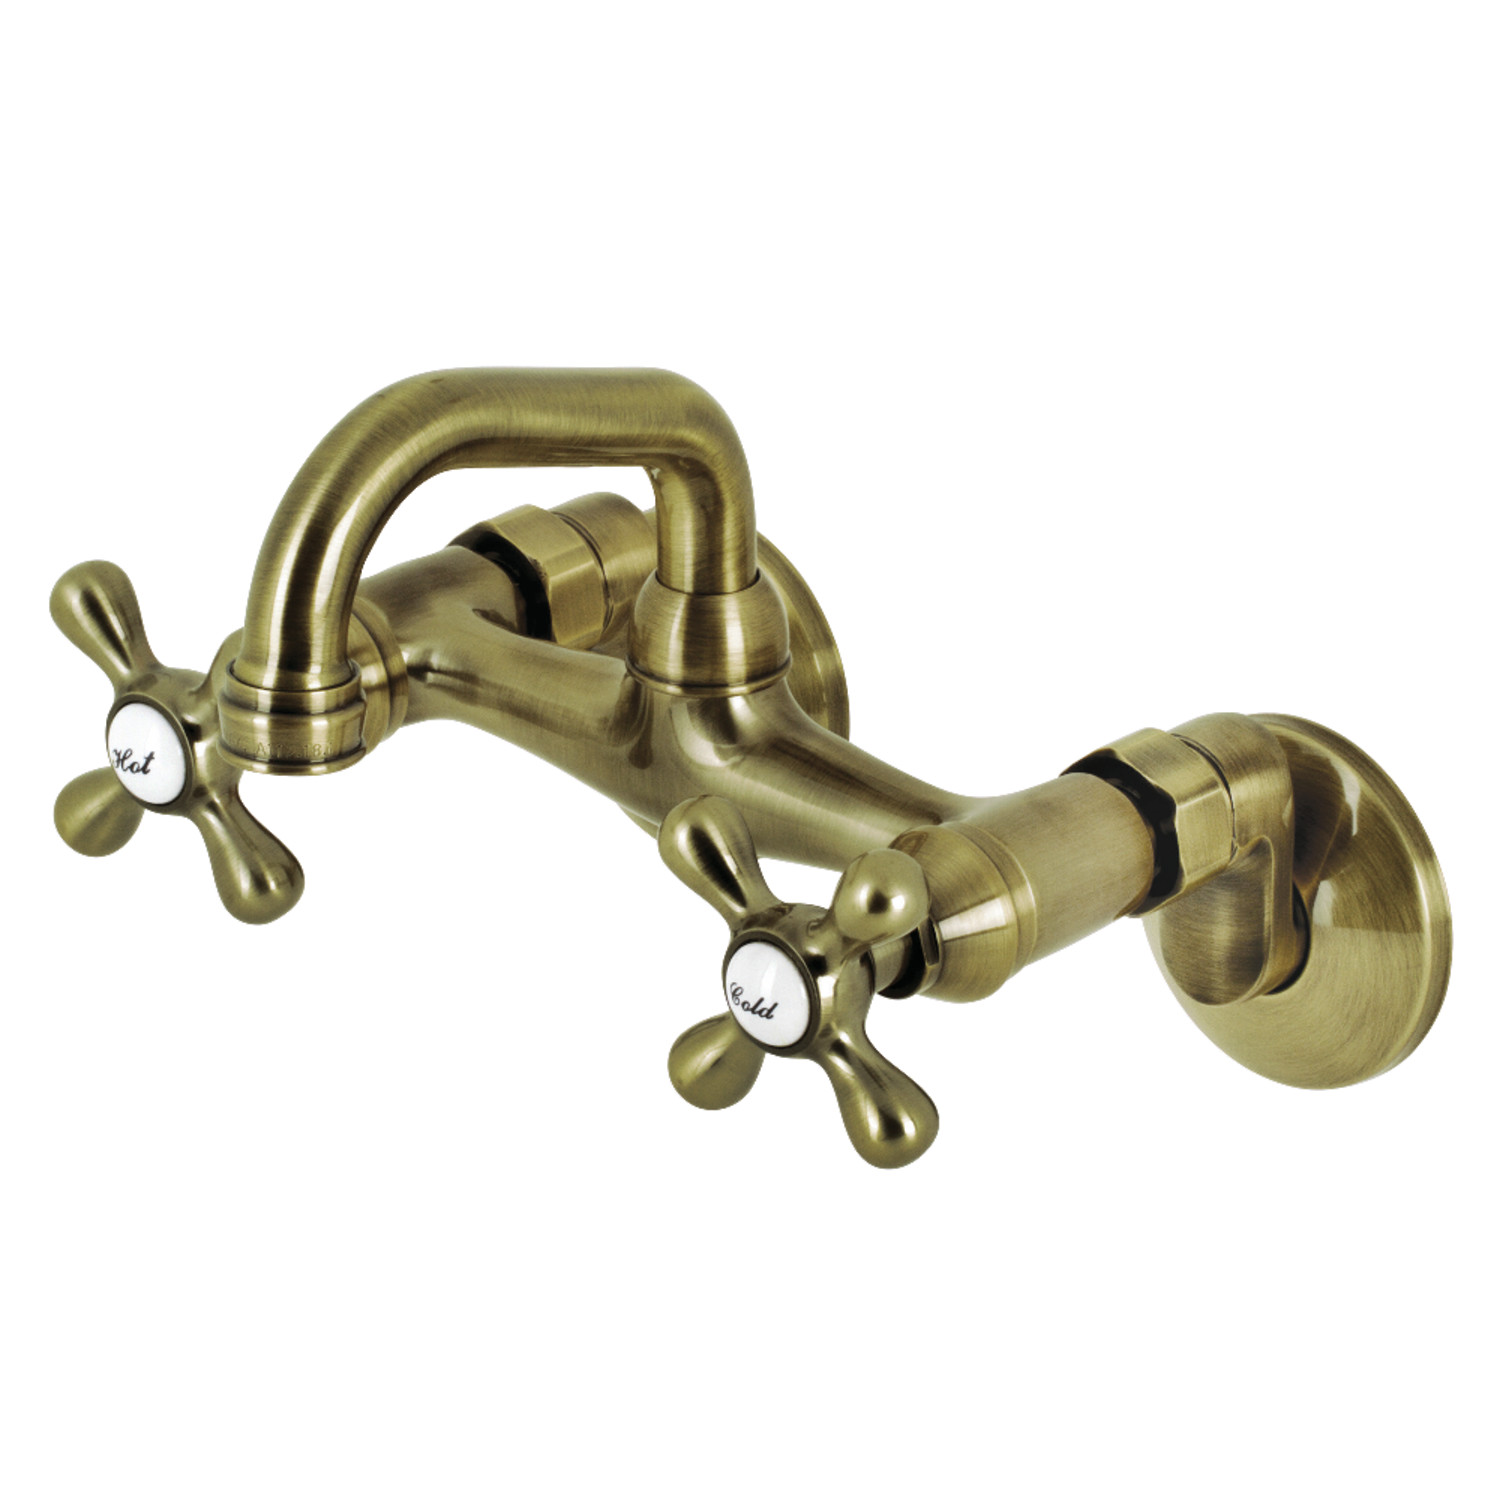 Kingston Brass KS212AB Two-Handle Wall Mount Bar Faucet, Antique Brass - image 1 of 2